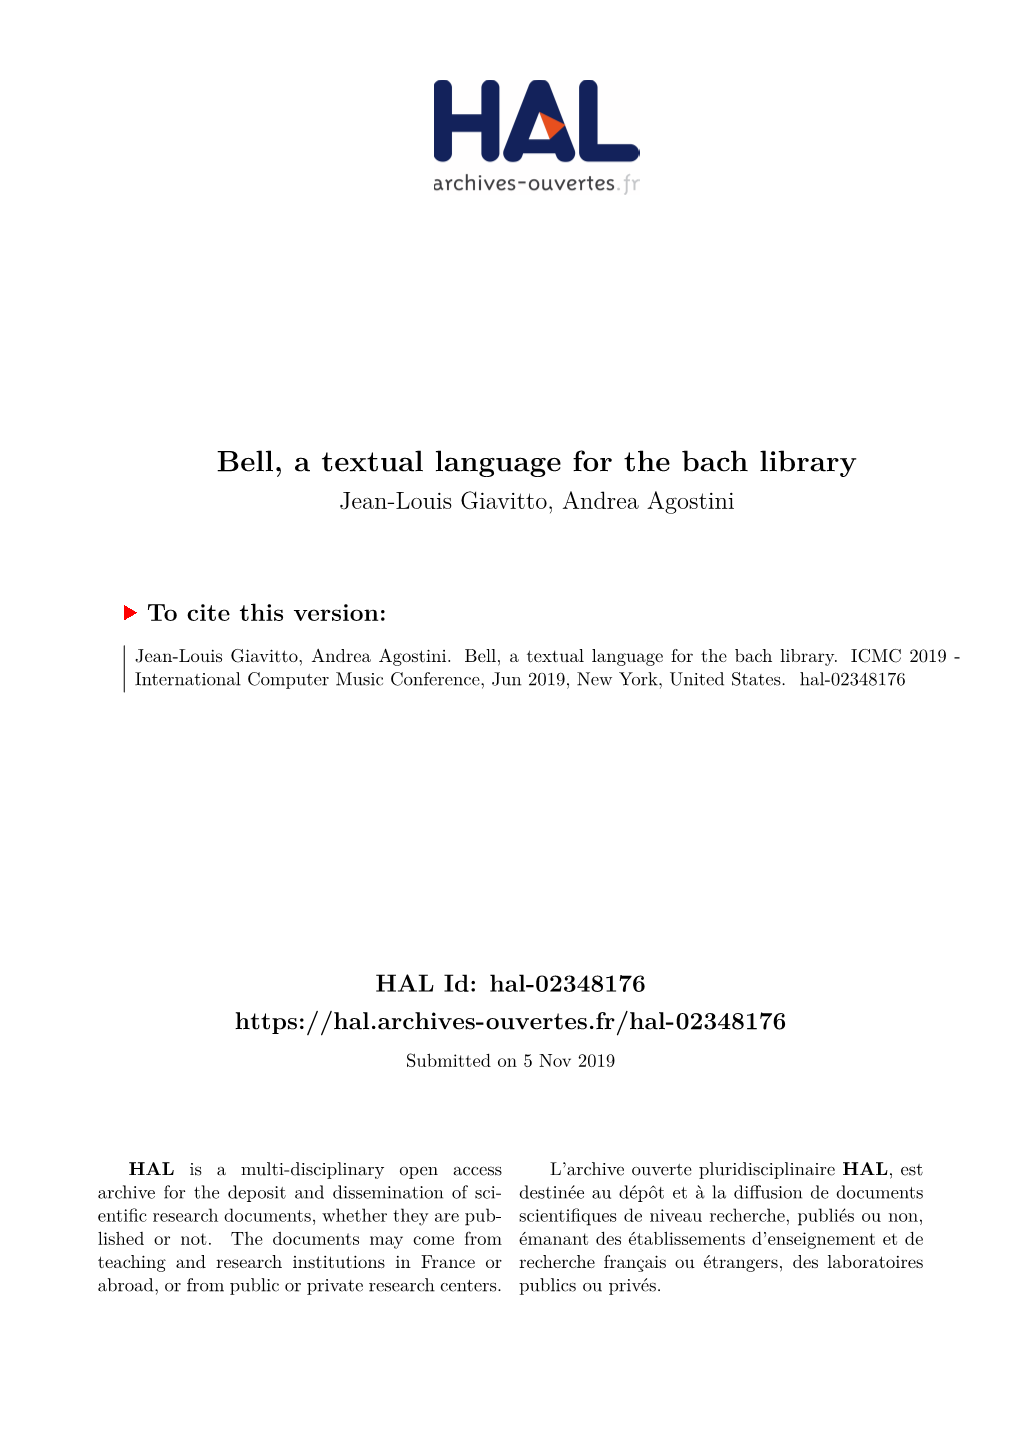 Bell, a Textual Language for the Bach Library Jean-Louis Giavitto, Andrea Agostini